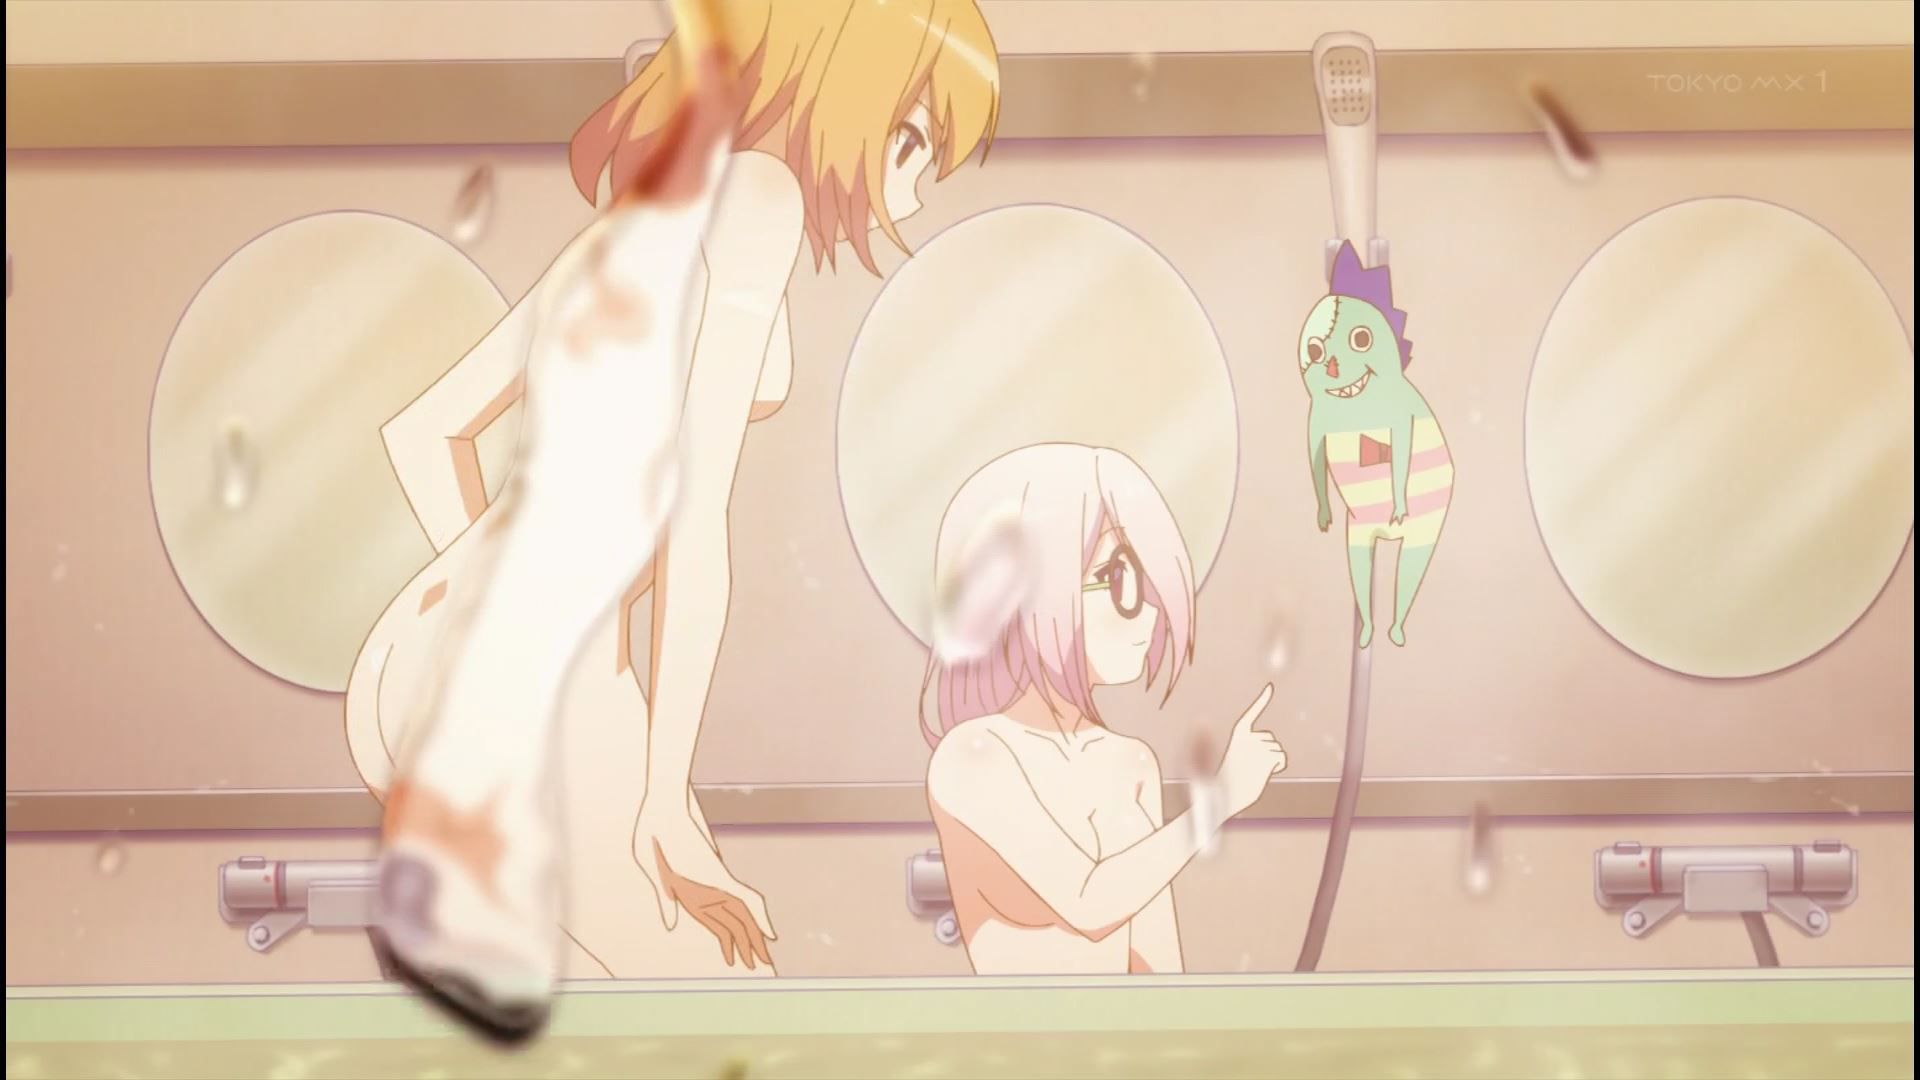 Erotic breasts and naked figure in erotic bathing scene of girls in the anime [Music girl] 2 story! 8